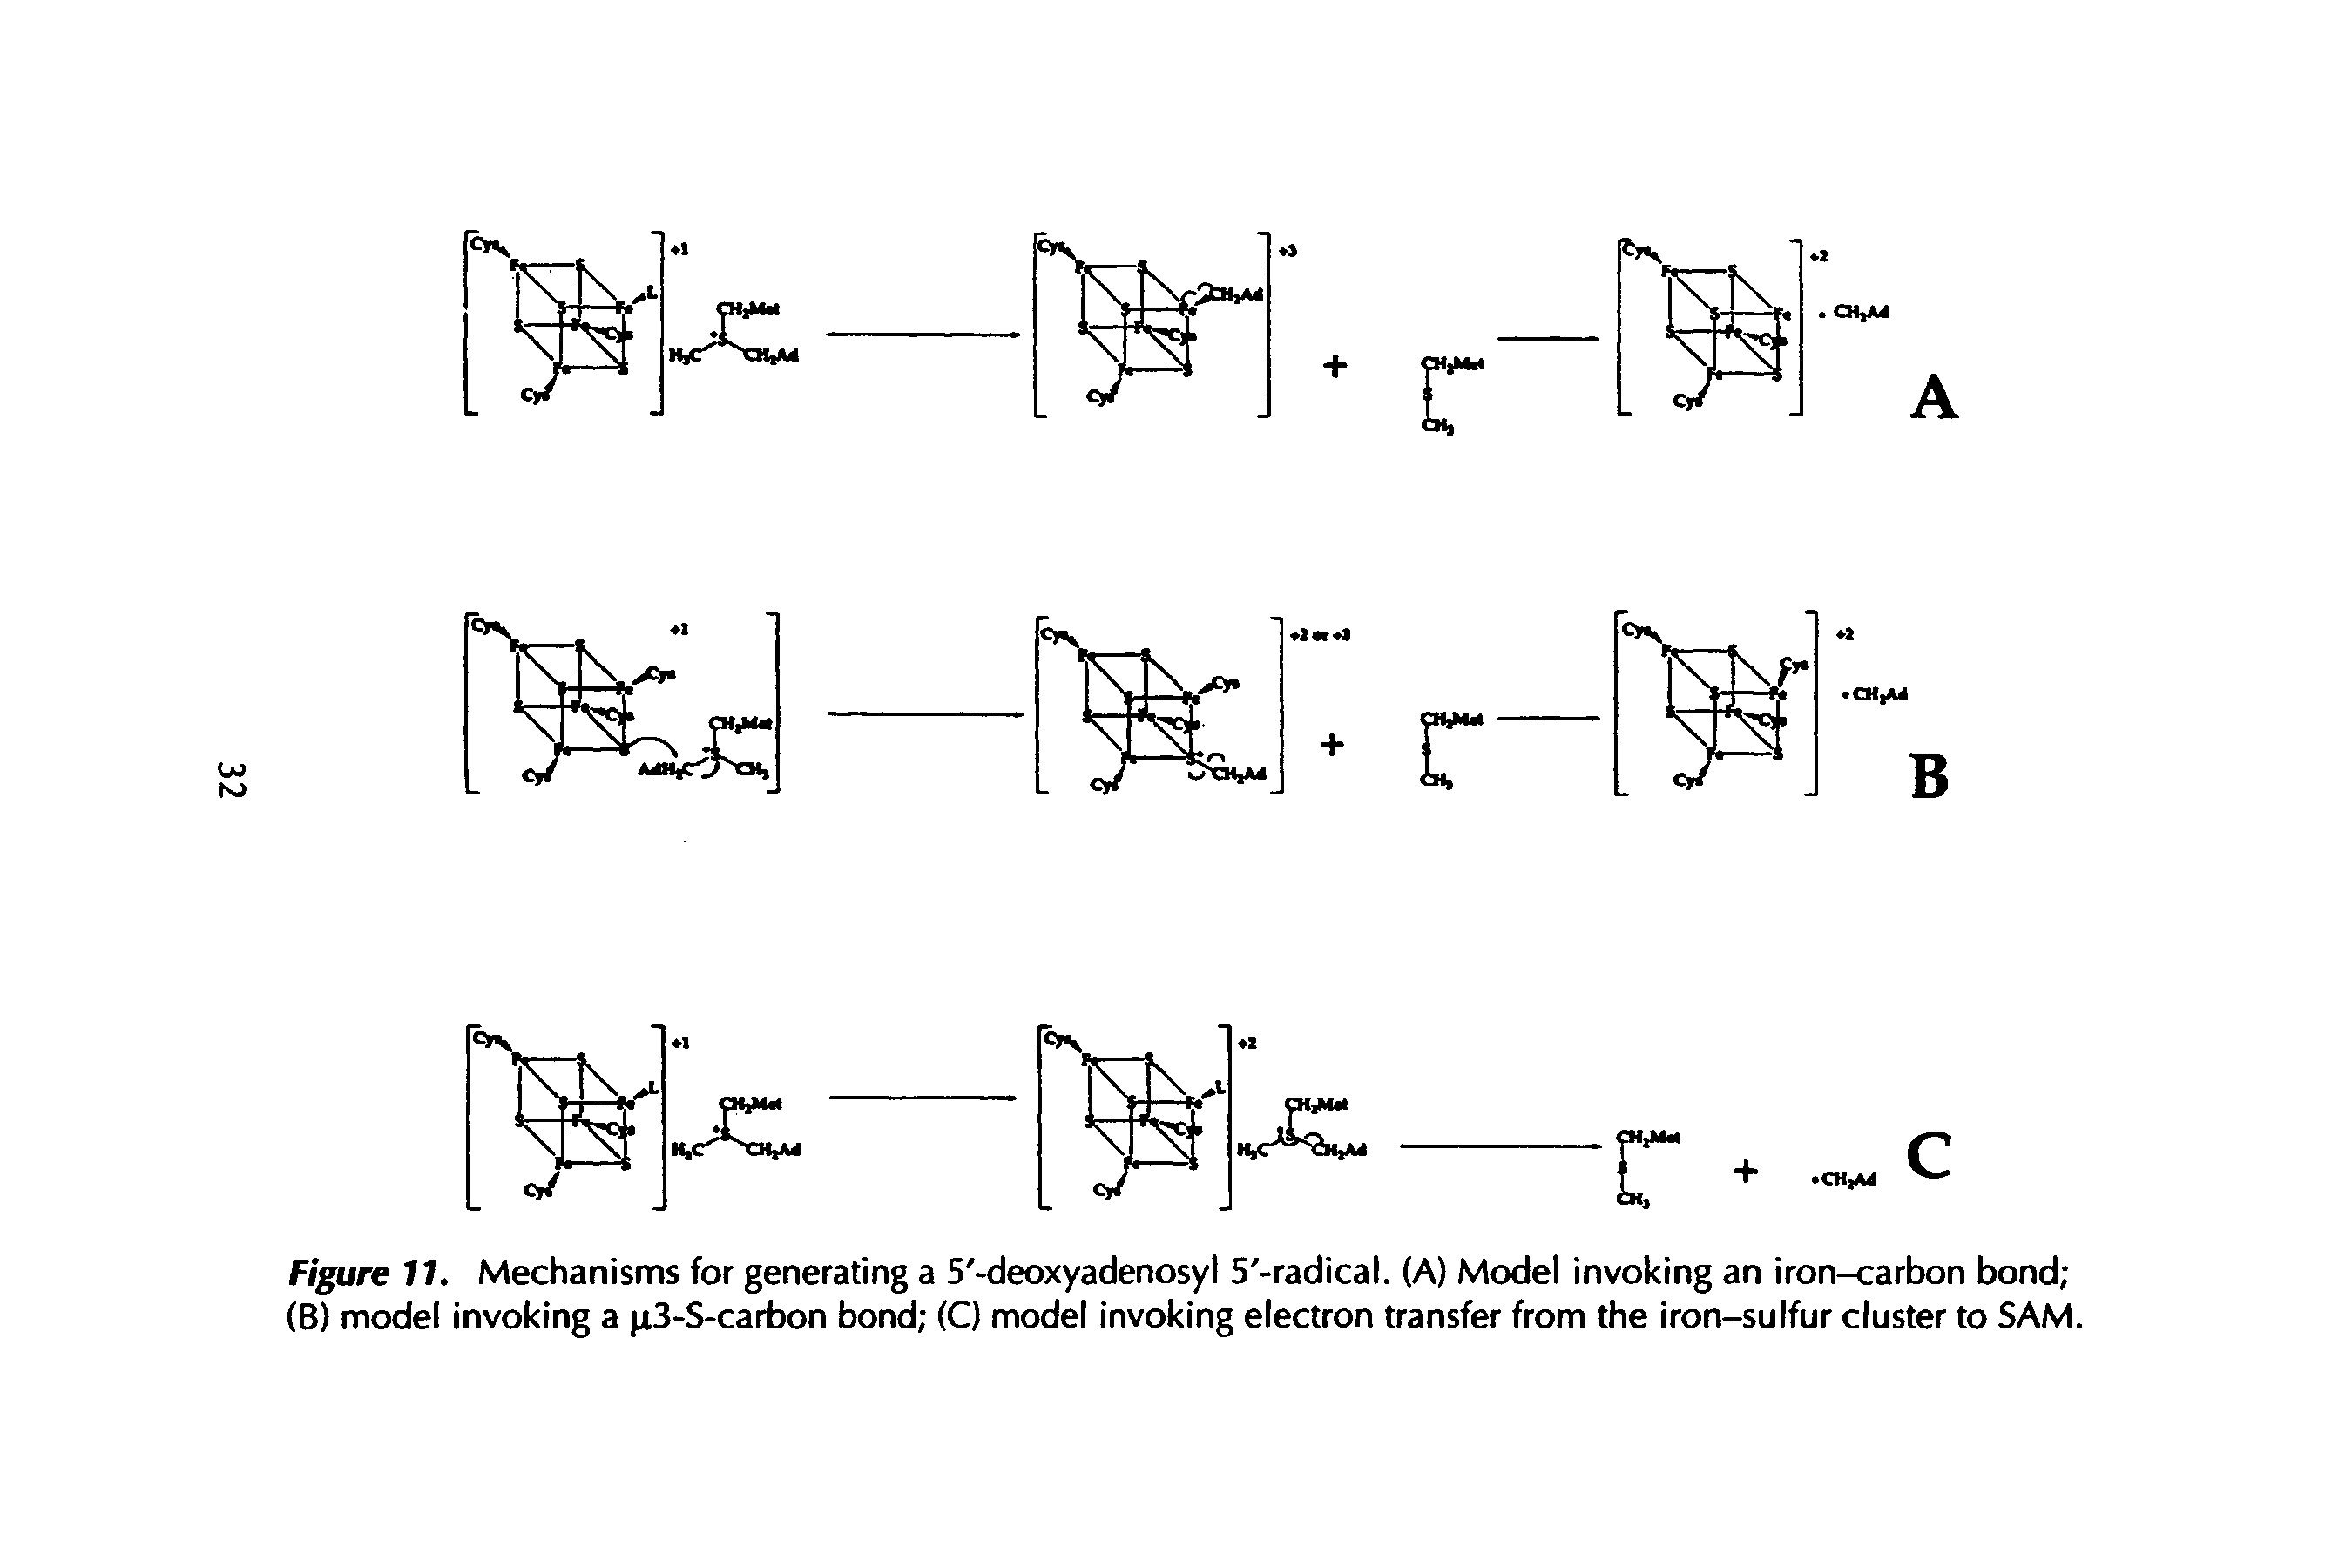 Figure 11. Mechanisms for generating a 5 -deoxyadenosyl 5 -radical. (A) Model invoking an iron-carbon bond (B) model invoking a n,3-S-carbon bond (C) model invoking electron transfer from the iron-sulfur cluster to SAM.